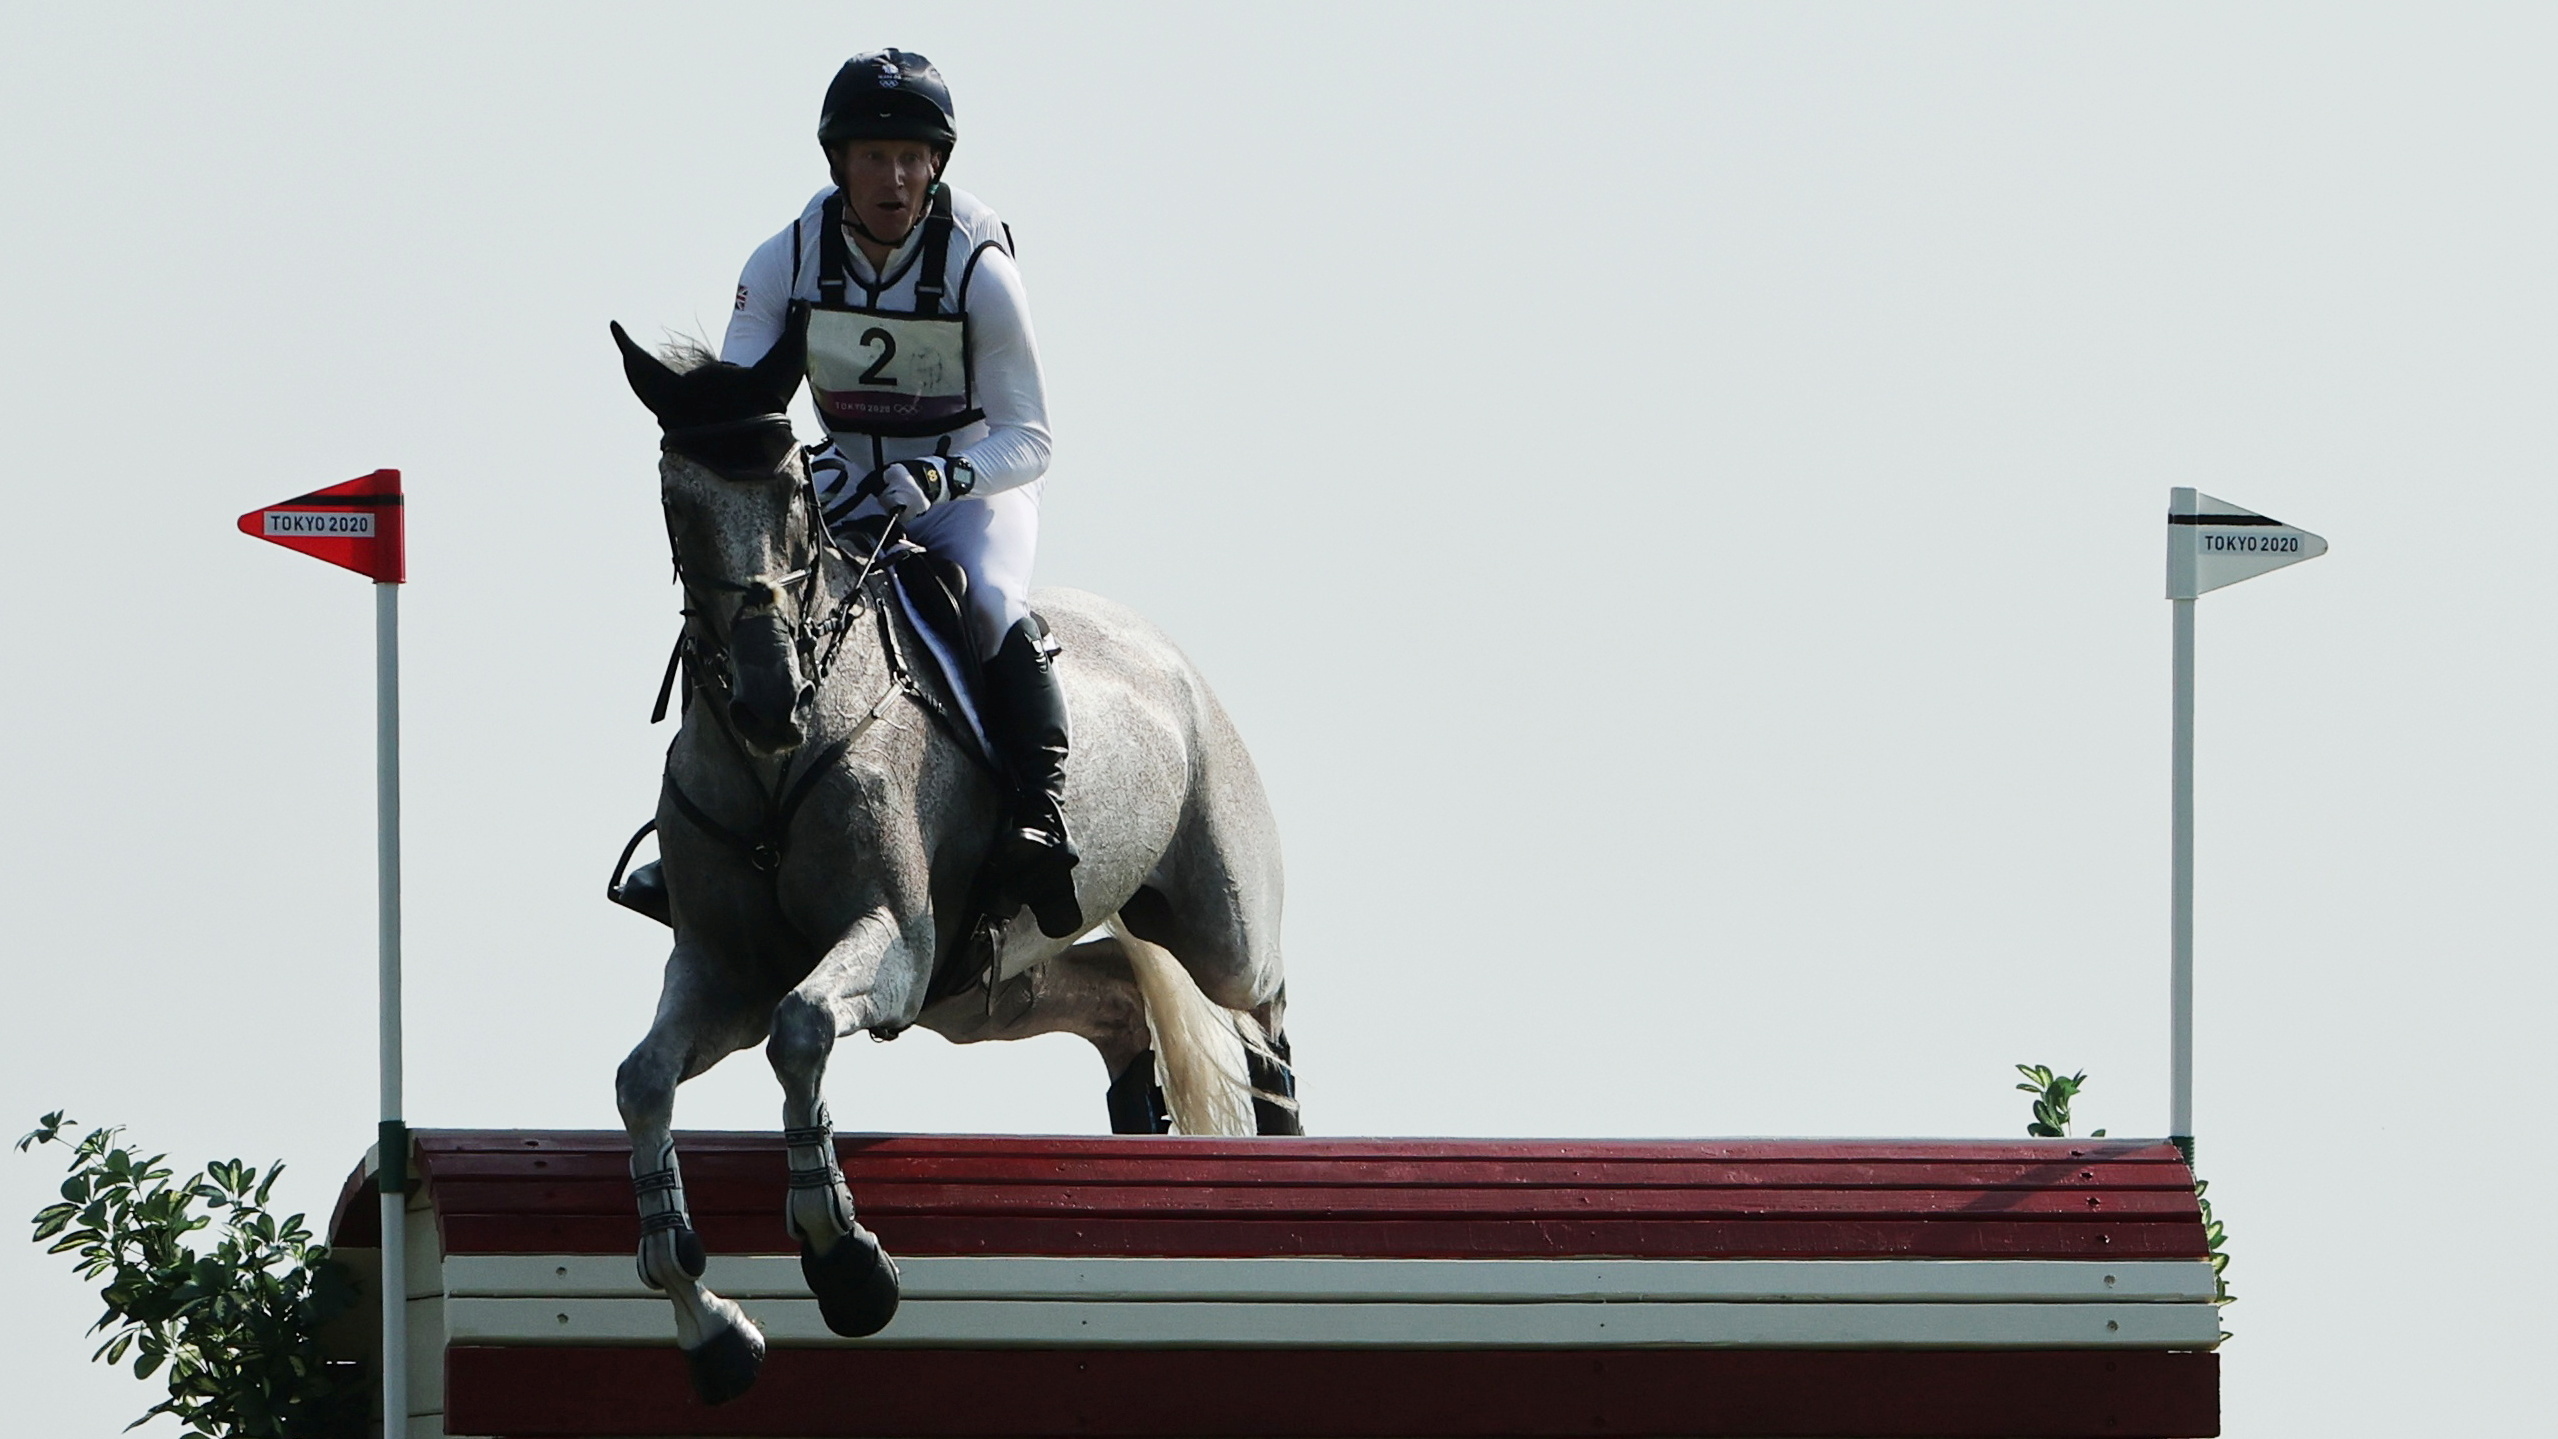 Equestrian Sports: Oliver Townend, A British eventing rider competing at the international three-day level. 2560x1440 HD Wallpaper.